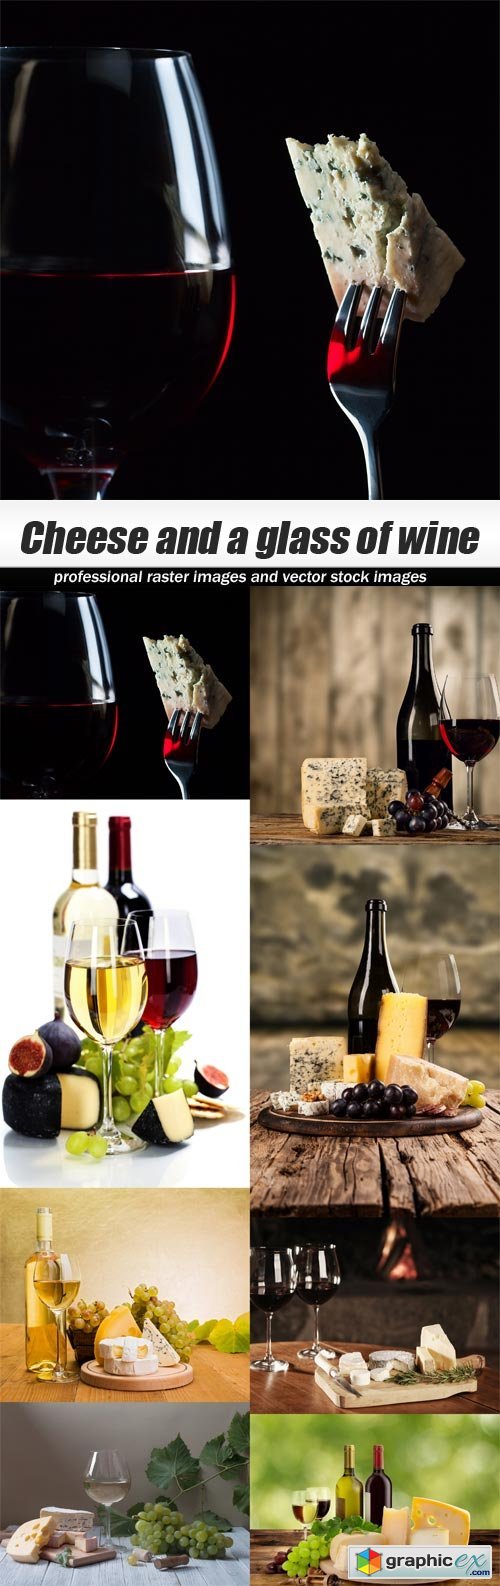 Cheese and a glass of wine